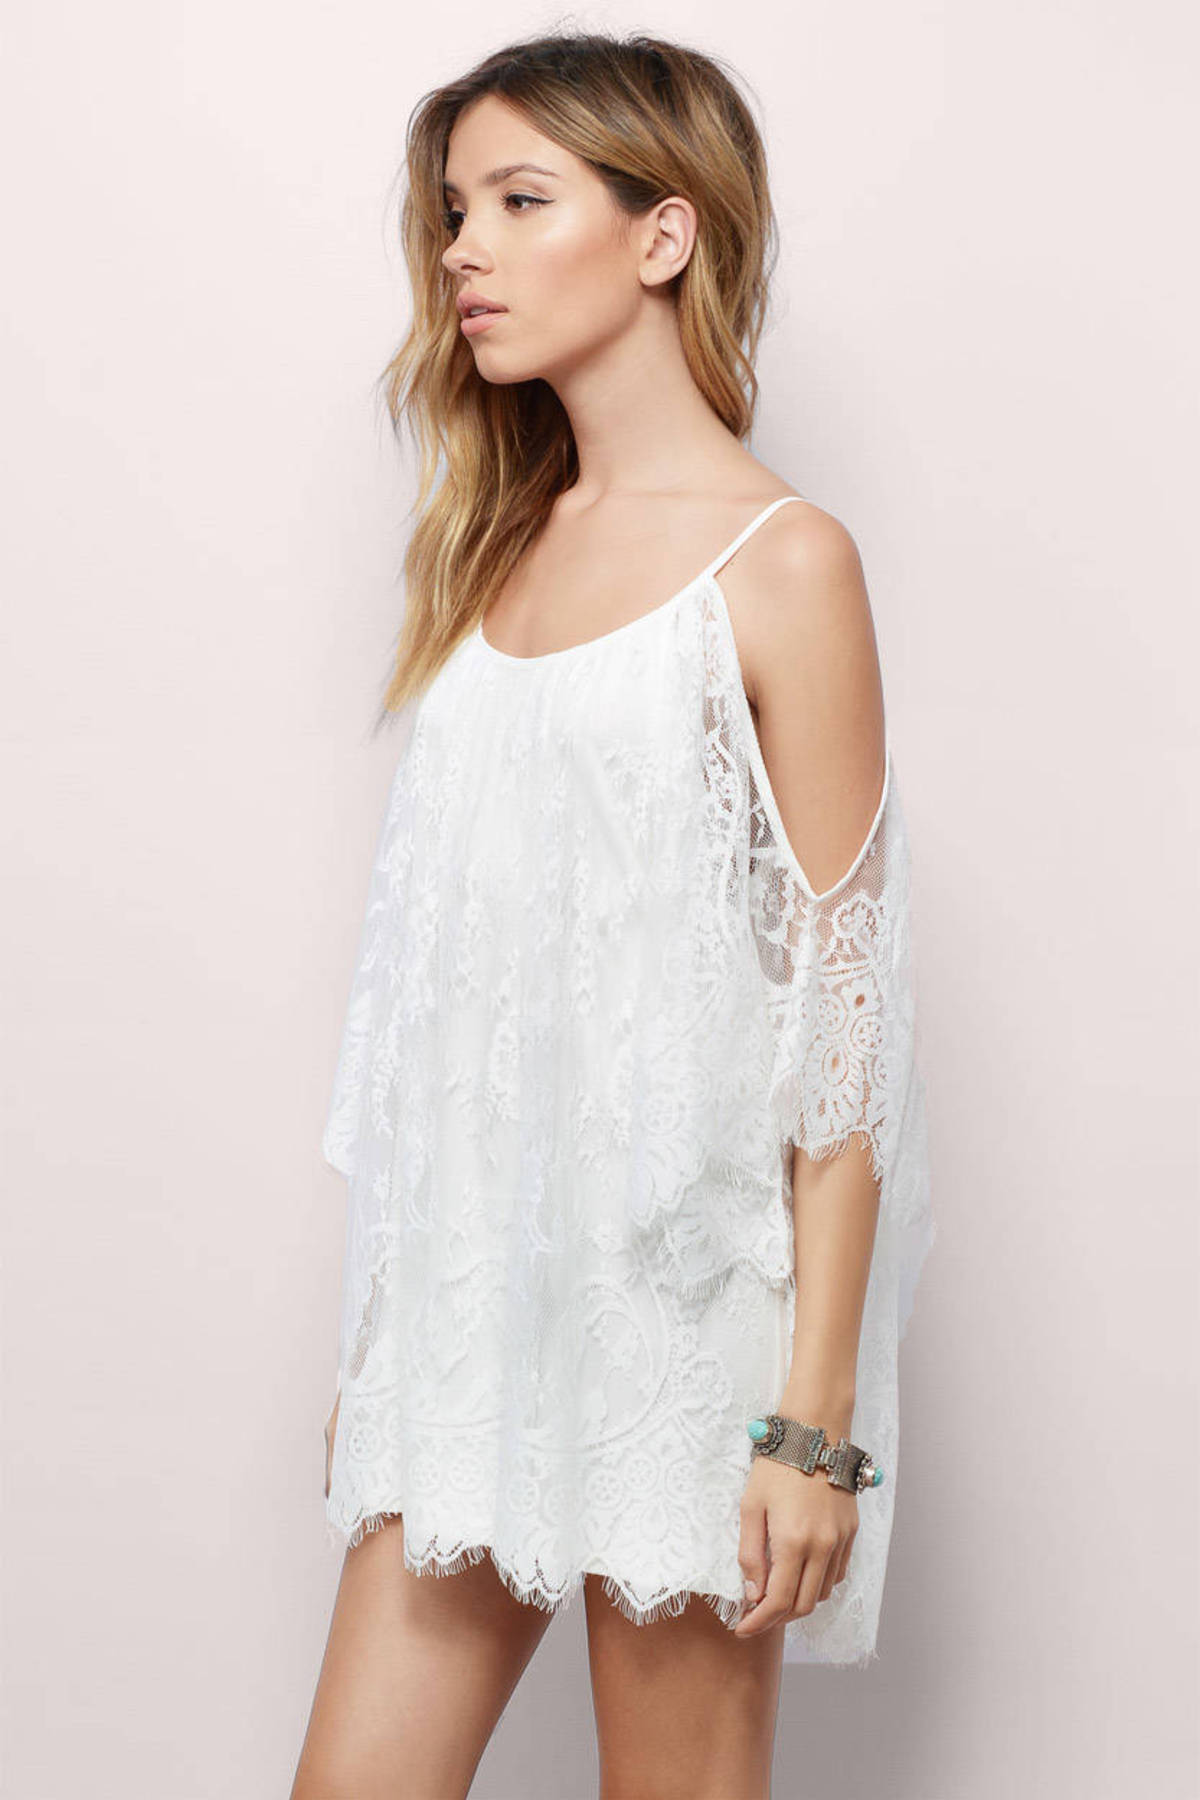 There She Goes Lace Dress - $46 | Tobi US